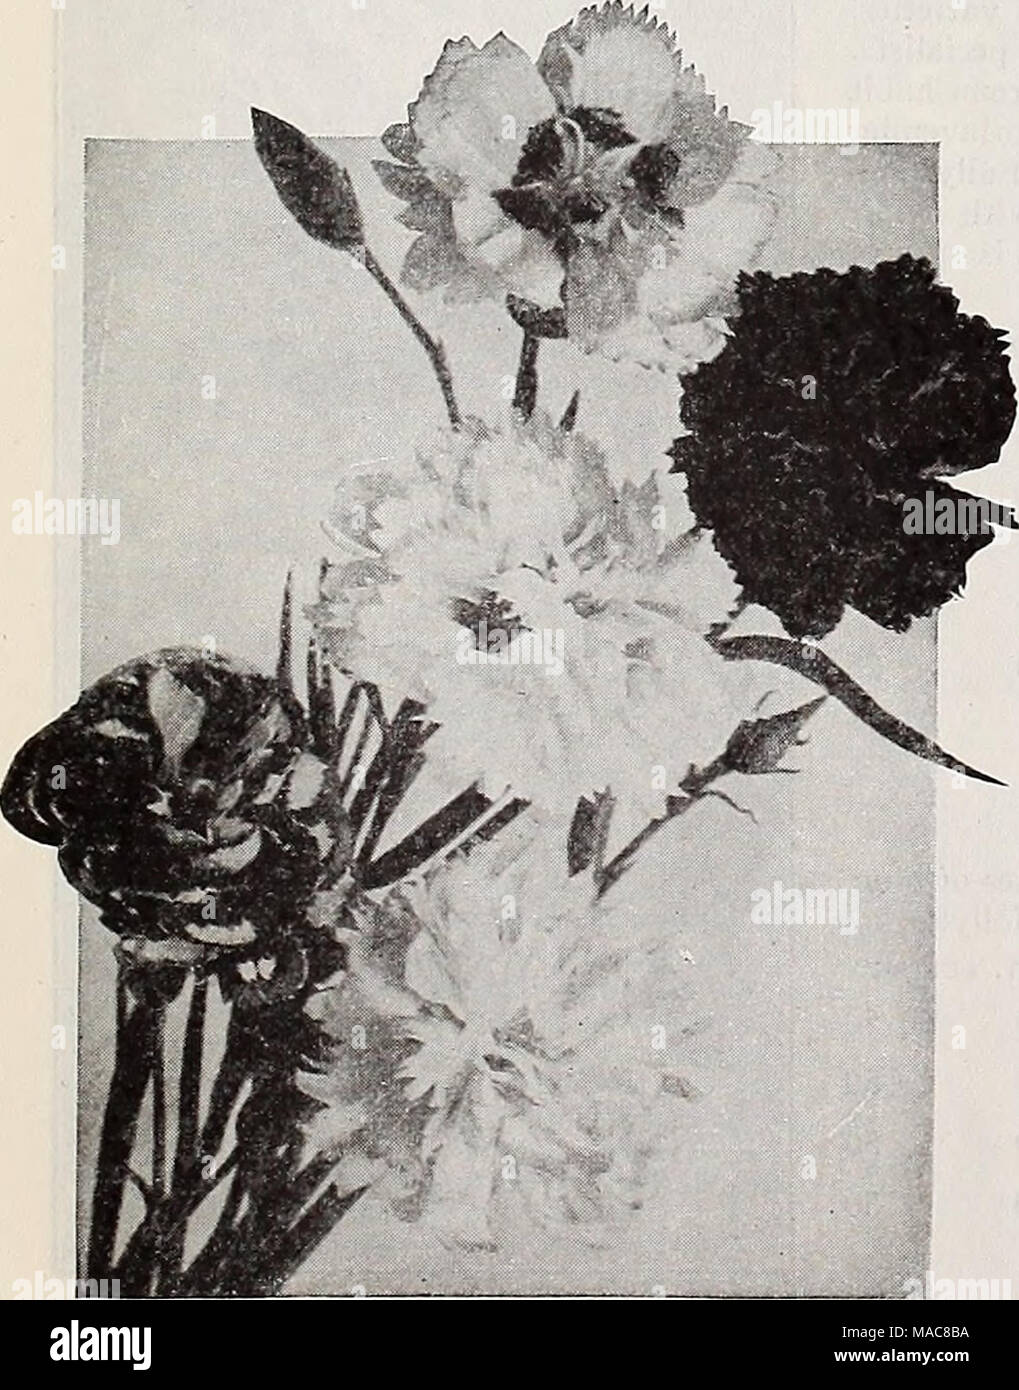 . Dreer's midsummer list 1932 . Dianihus Plumarius Semperflorens Hardy Dianthus or Garden Pinks (Dianthus Plumarius, etc.) These varieties are well adapted for beds and borders; delightful, refreshing, spicy odor; should be in every garden where cut flowers are wanted, and make a fine edging to a hardy border; also ex- cellent for rock gardens. per pkt. 2335 Caesius {Cheddar Pink). A splendid rock plant form- ing dense tufts a few inches high and sweet scented bright rosy-pink flowers in May and June. % oz., 50 cts ...A 2334 Deltoides, Brilliant (Maiden Pink). A charming creeping variety, with Stock Photo